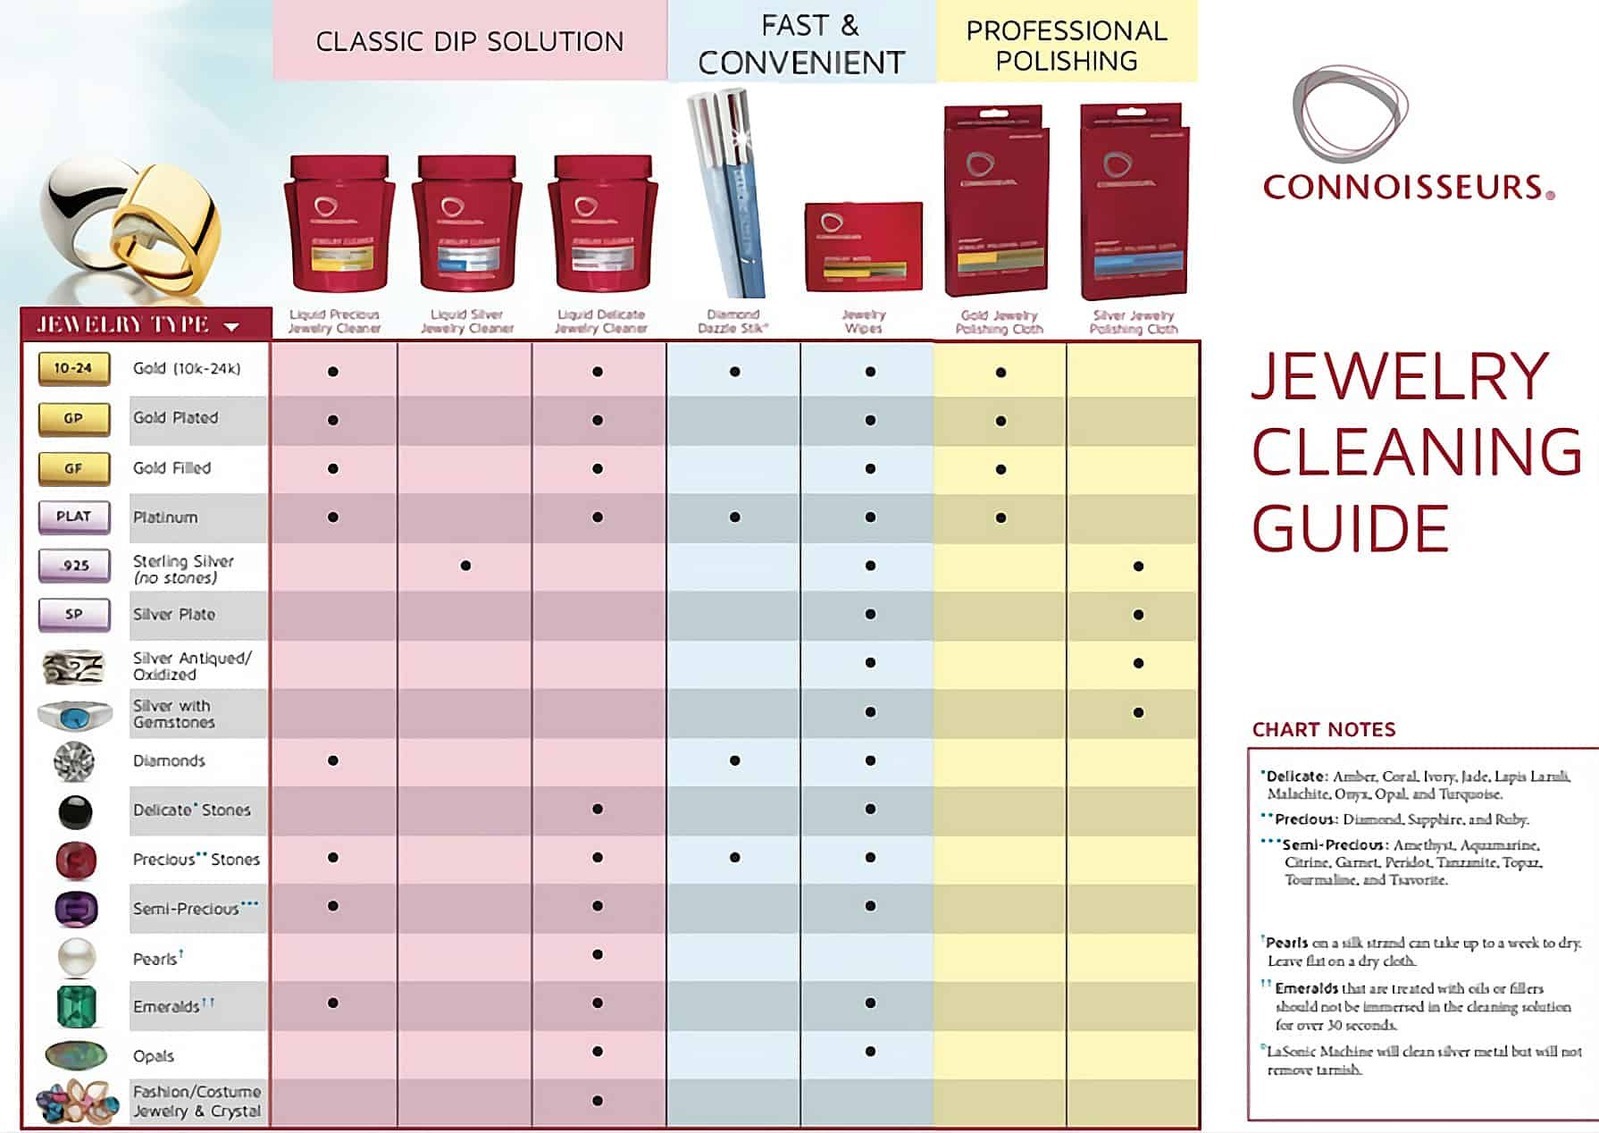 How To Use Connoisseurs Silver Jewellery Cleaner